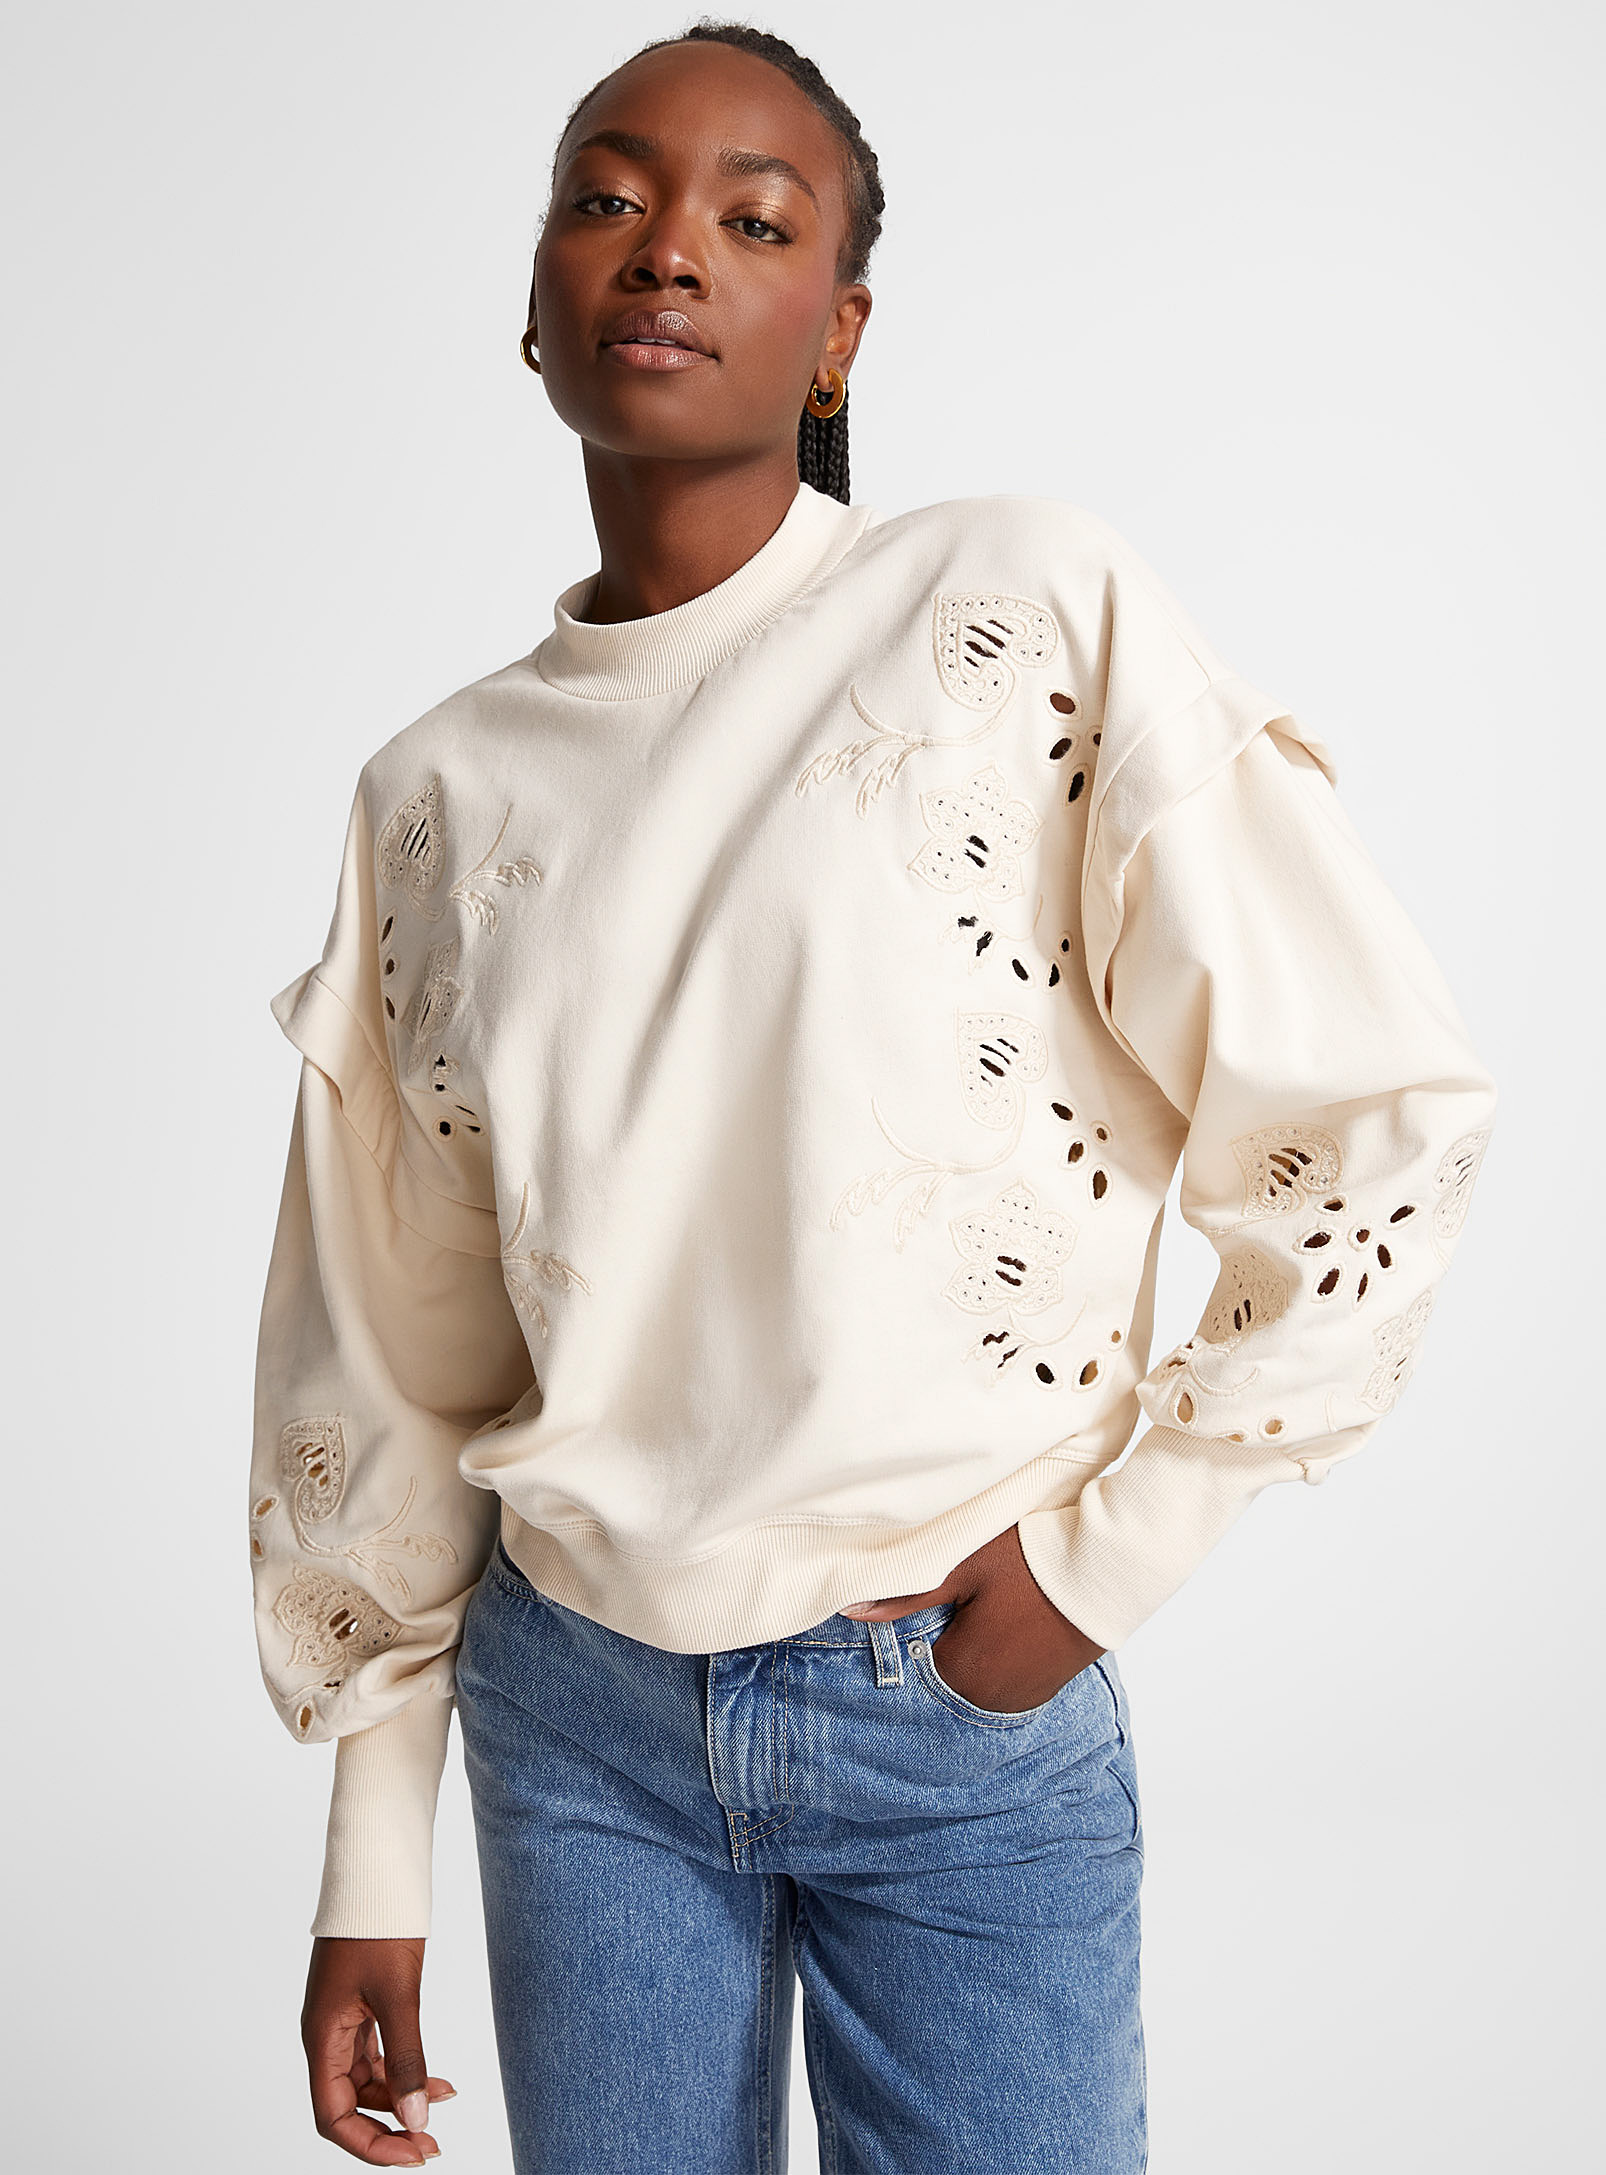 Icone Openwork Embroidered Patterns Loose Sweatshirt In Ivory White